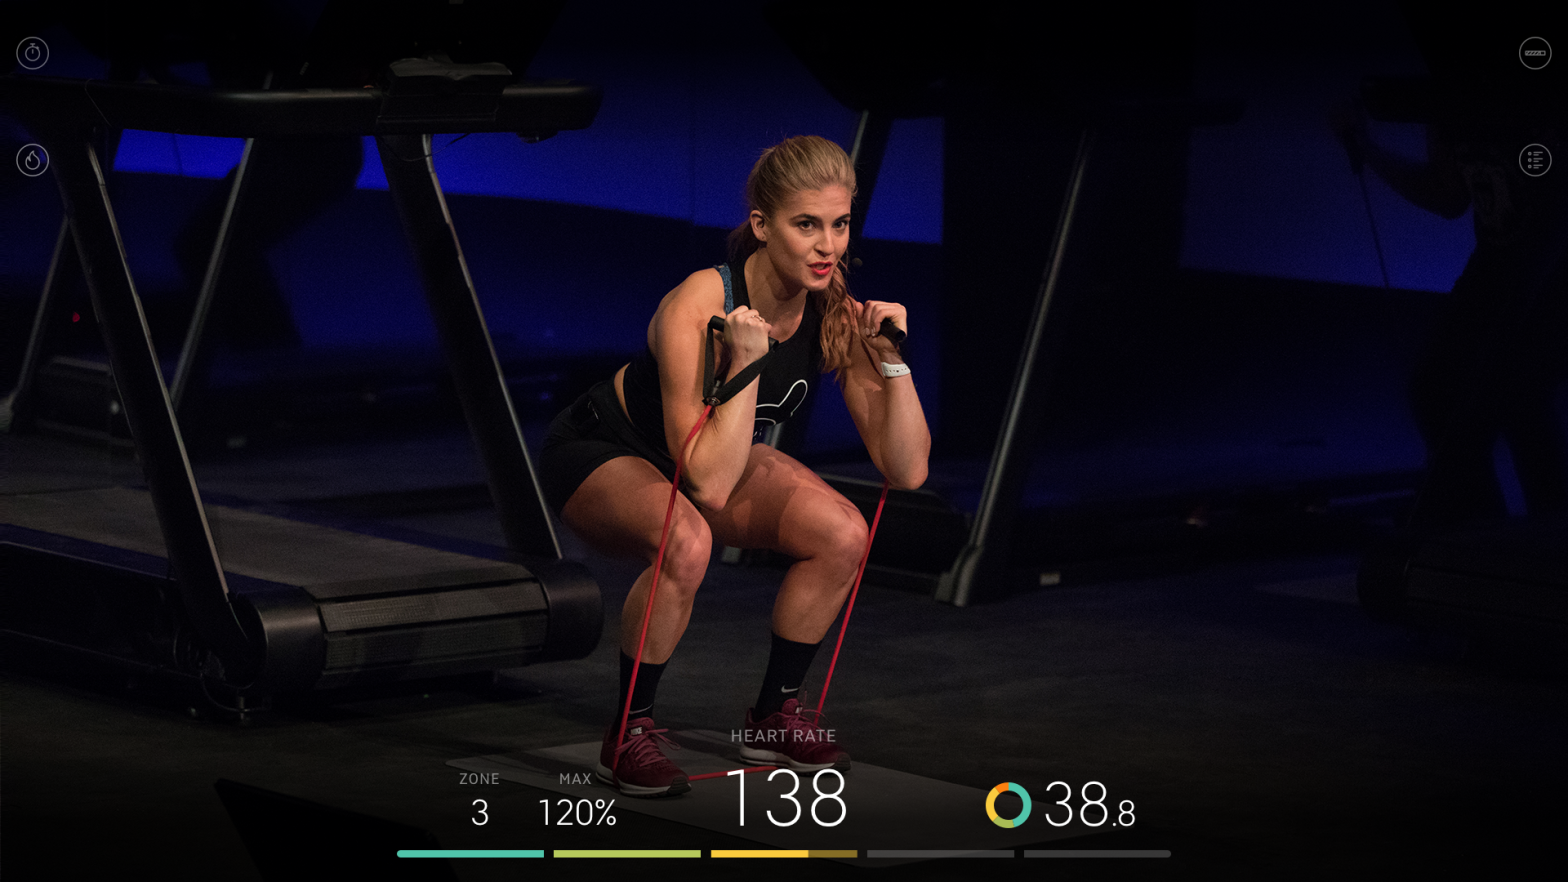 A new Strive Score uses data from a Bluetooth heart rate monitor to help you measure your progress. (Image: Peloton)